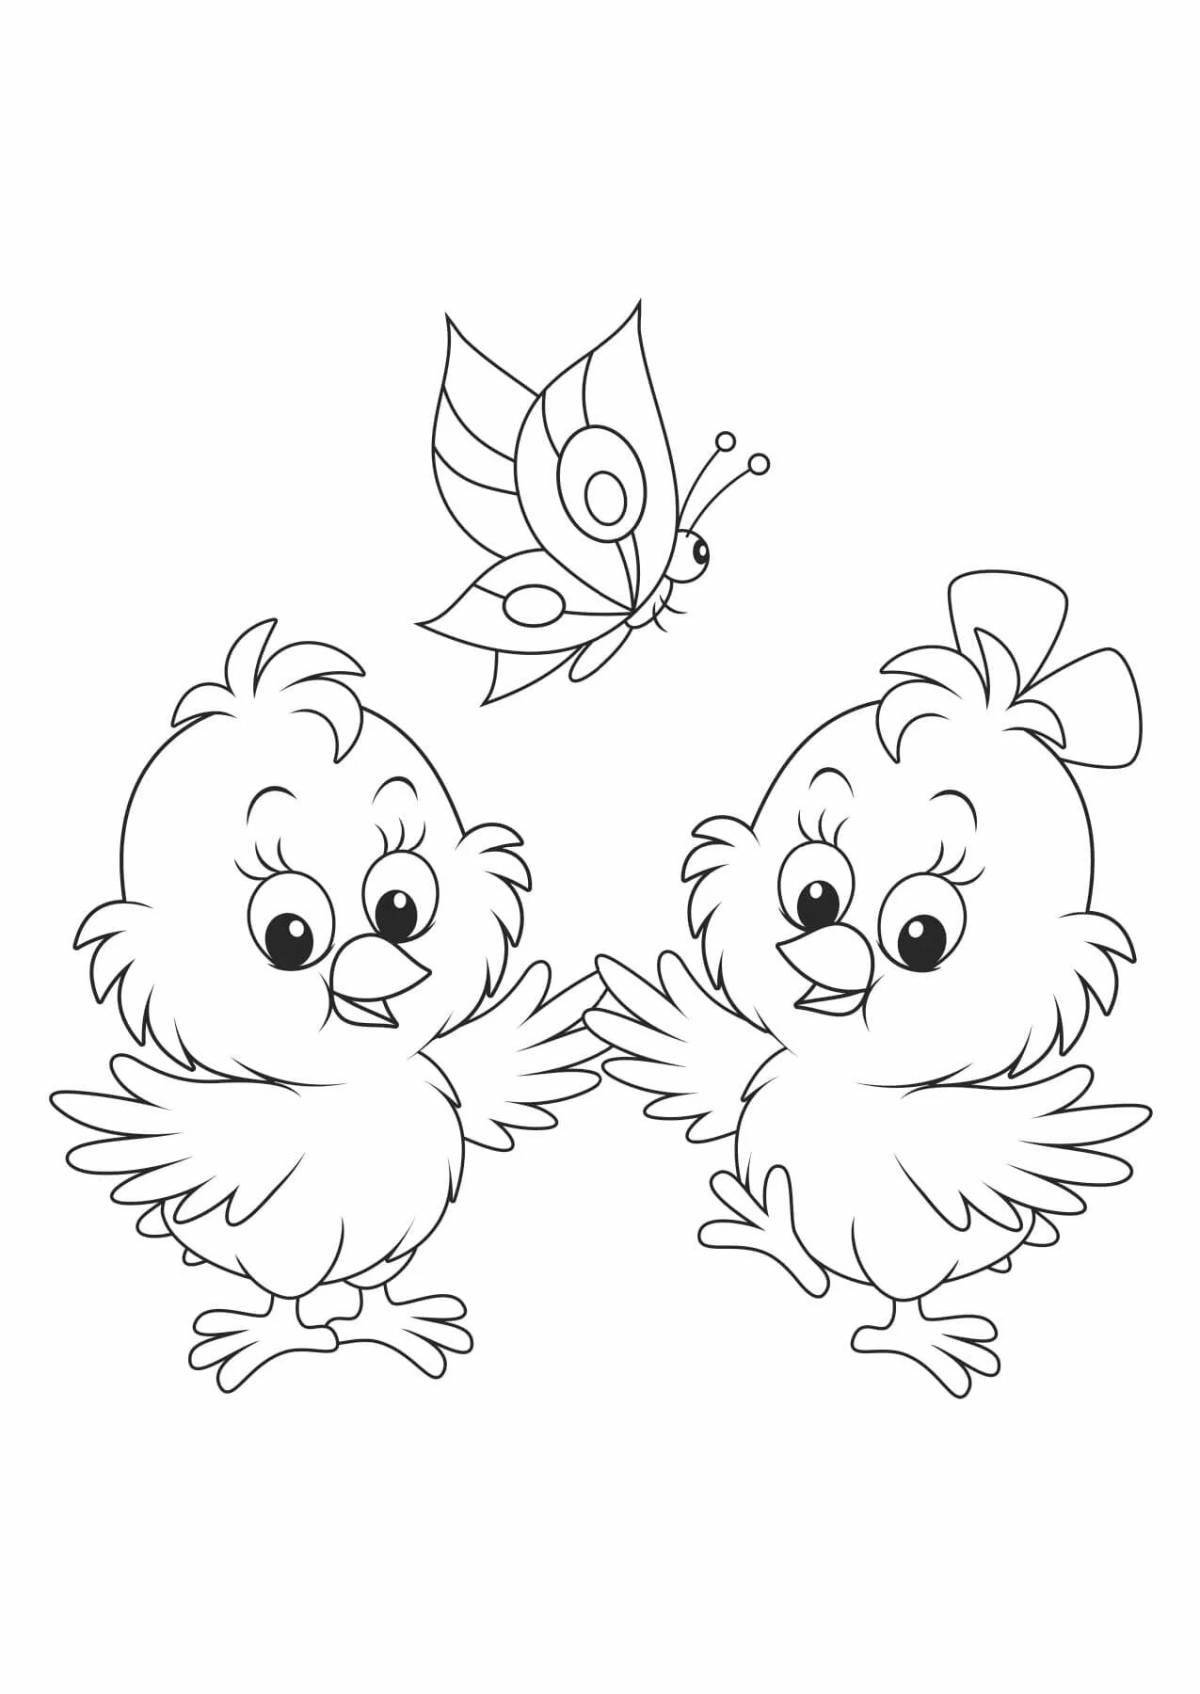 Cute chick coloring book for kids